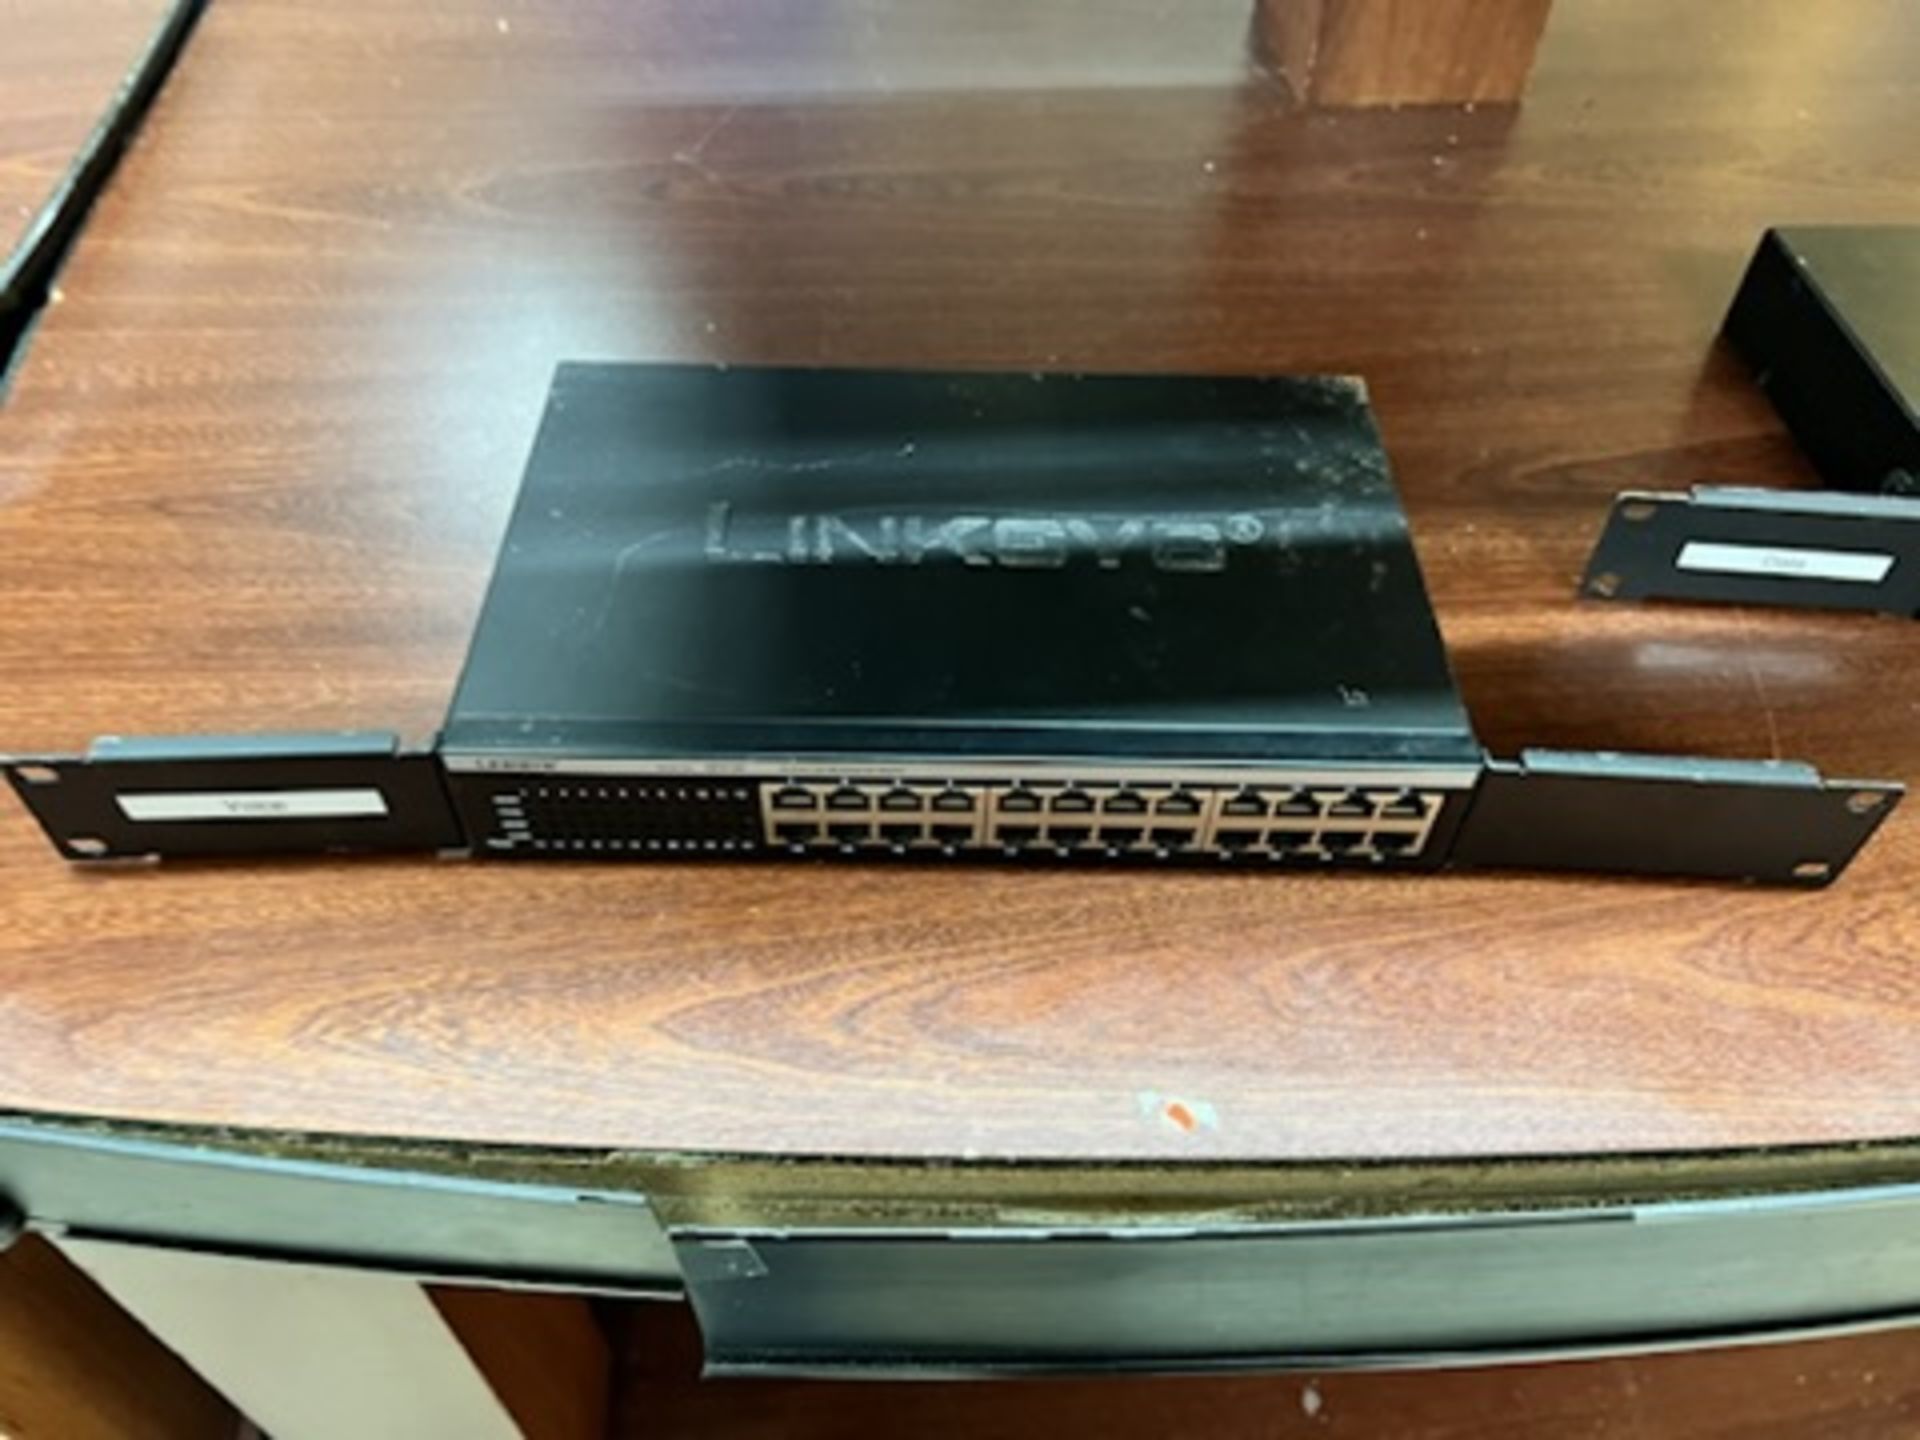 Lot of: (2) Cisco 2500 series routers , (1) Cisco IAD 2400 Series router, (2) Linksys 24-port intern - Image 15 of 18